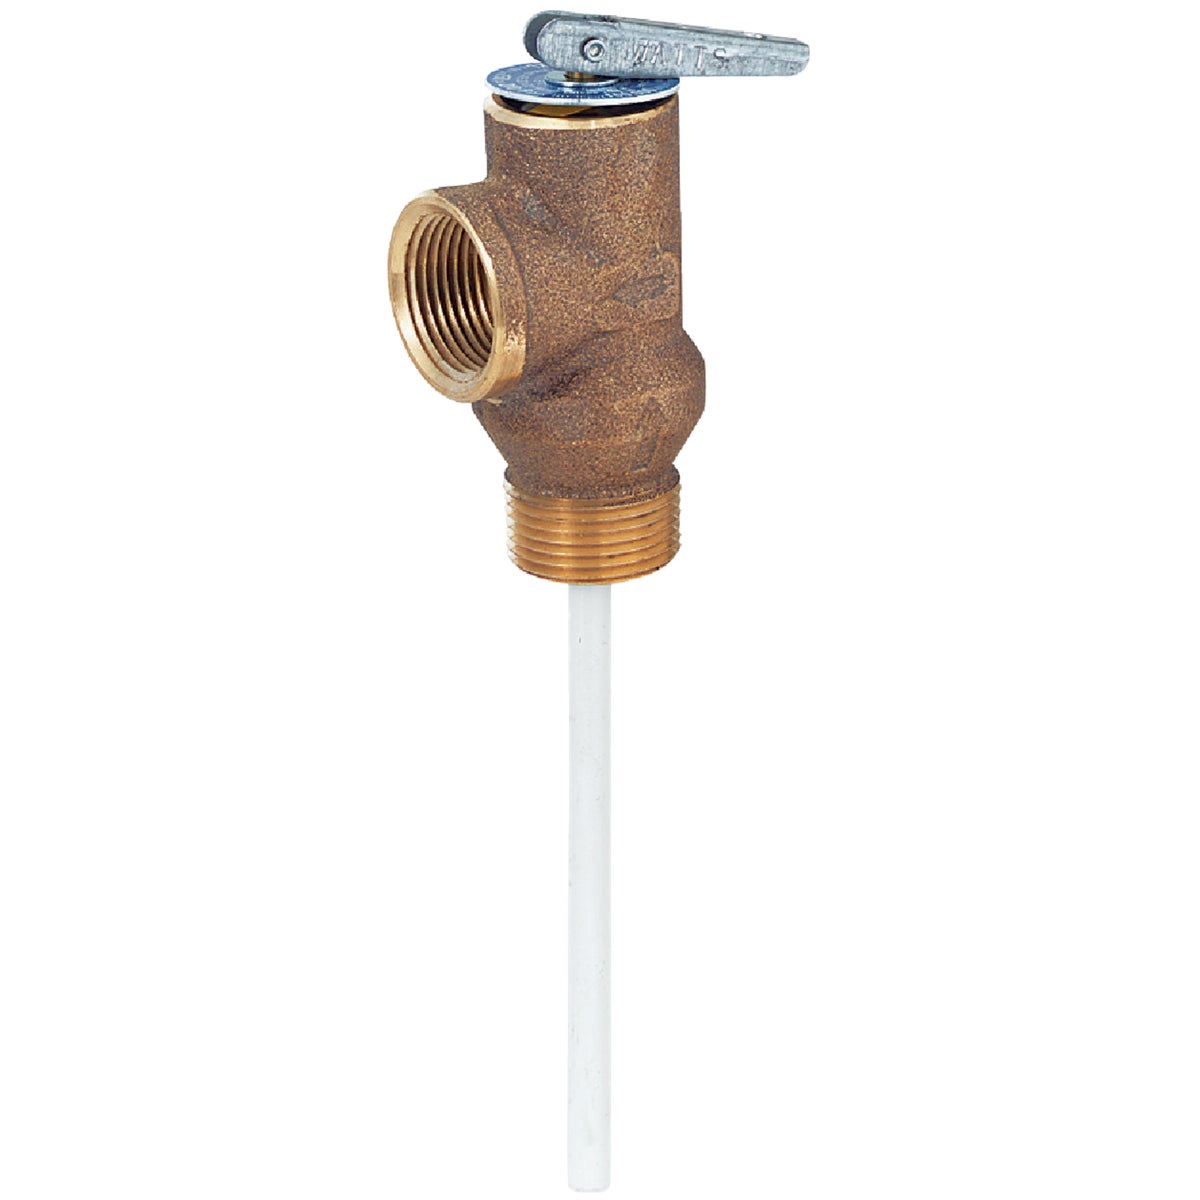 Item 401156, Series 100XL temperature and pressure relief valves are used in water 